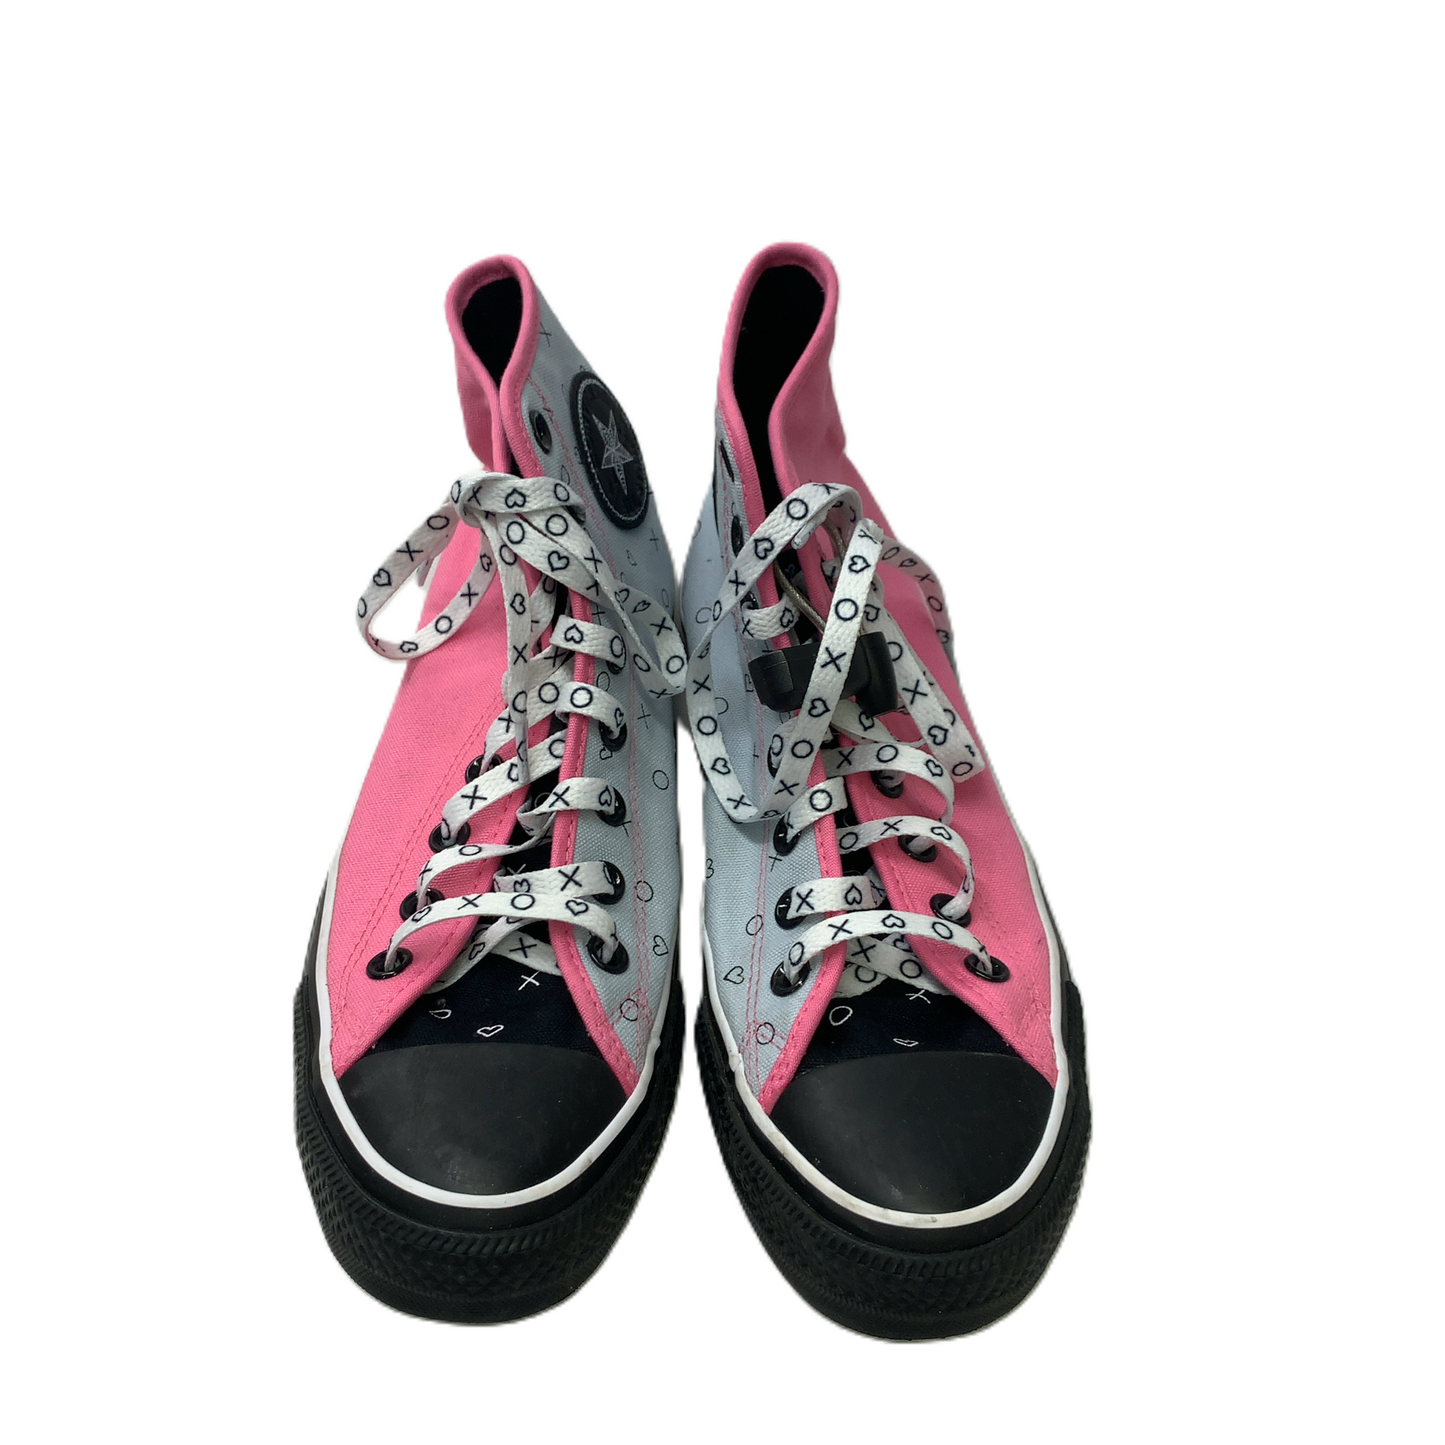 Grey & Pink  Shoes Sneakers By Converse  Size: 9